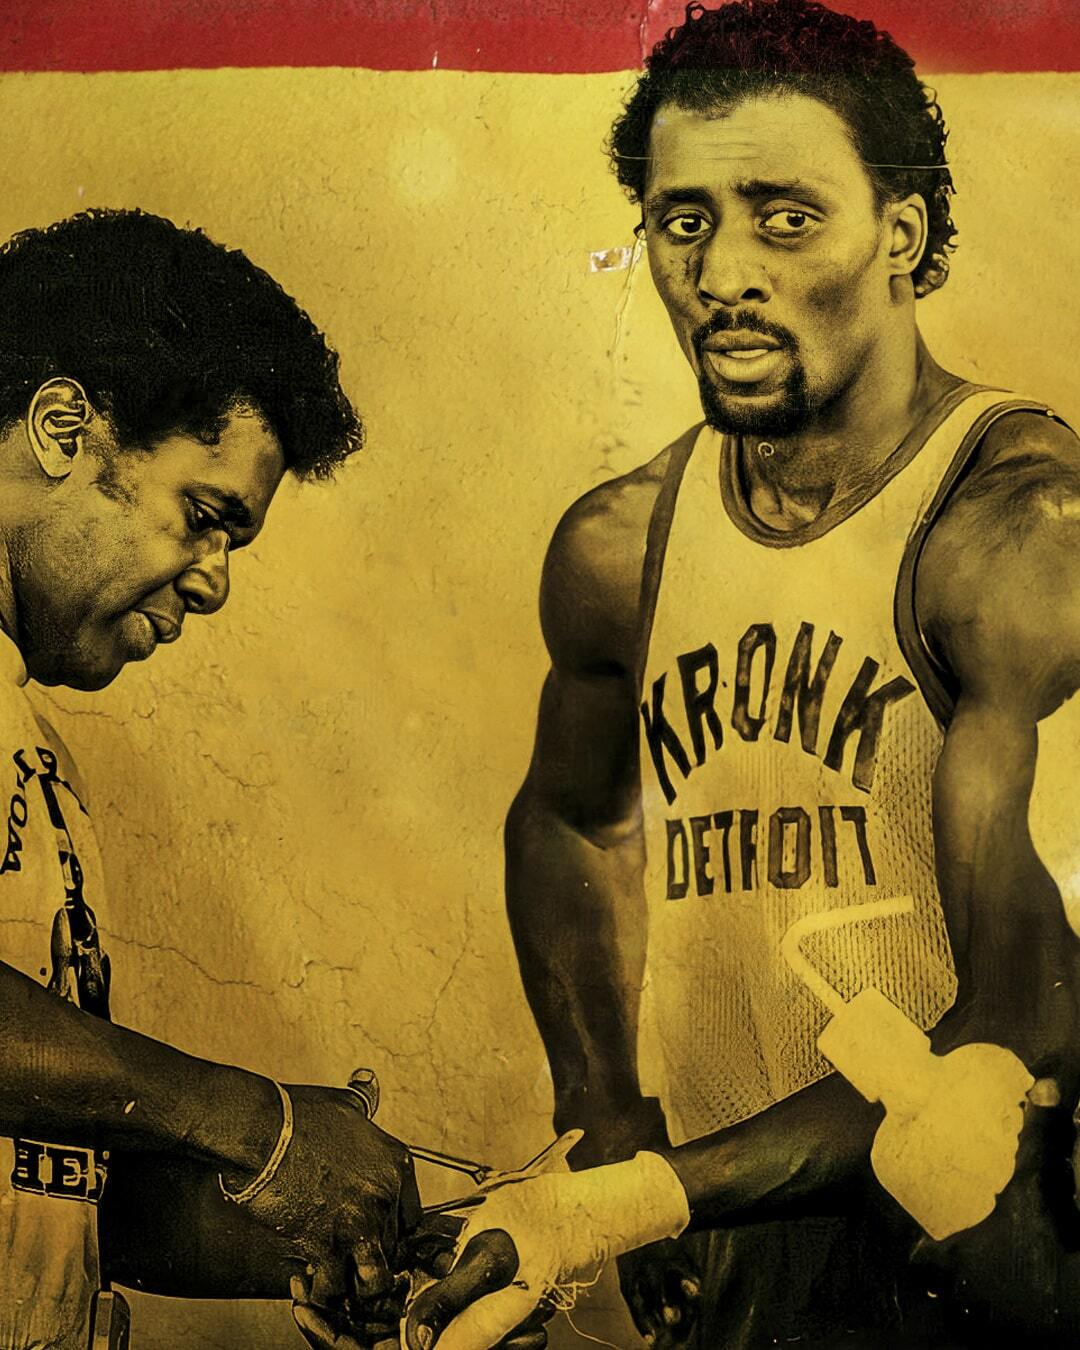 Thomas Hearns | Copasetic Clothing Ltd. dba Roots of Fight